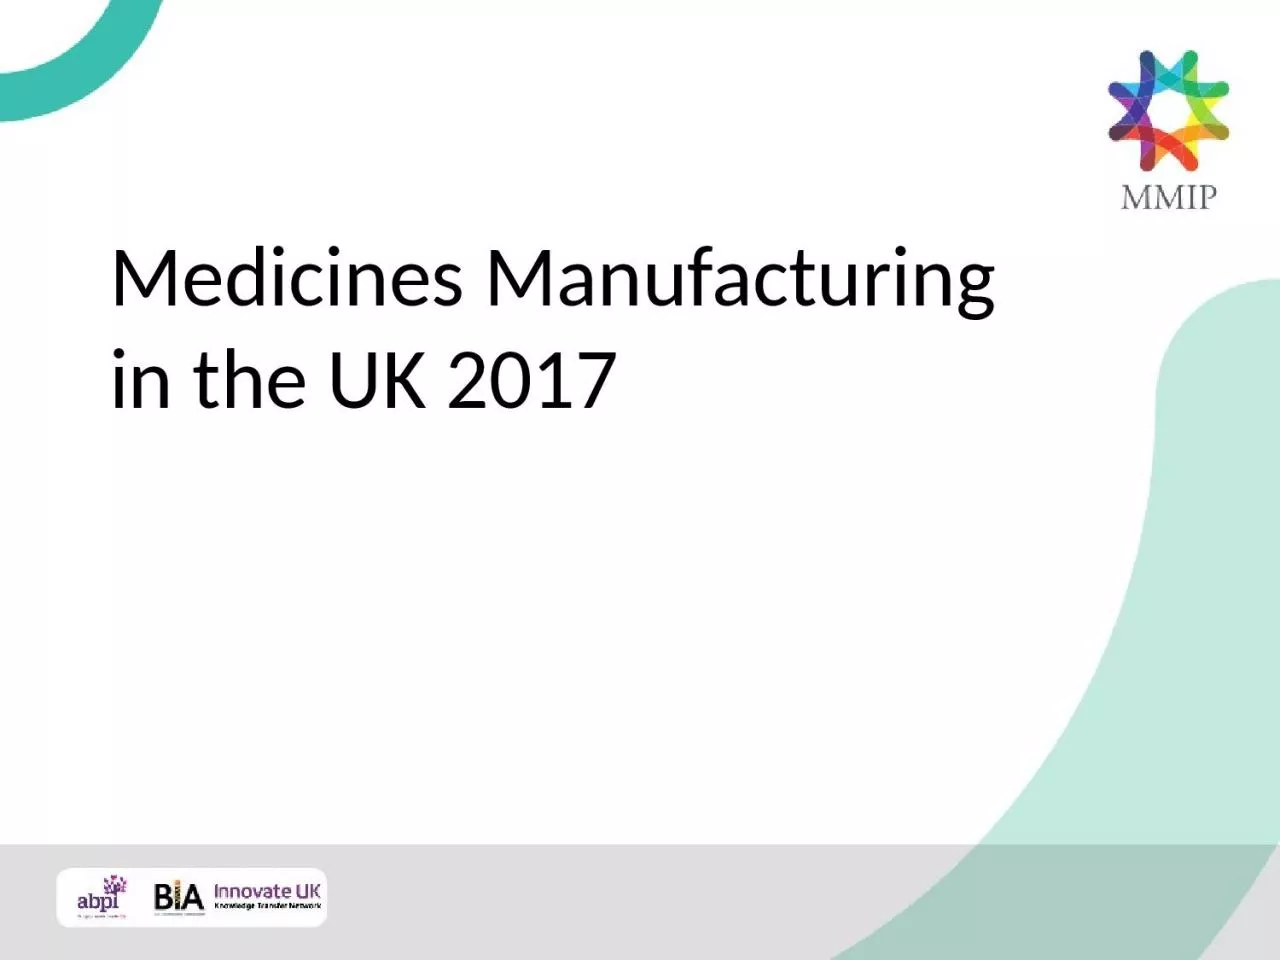 Medicines Manufacturing in the UK 2017